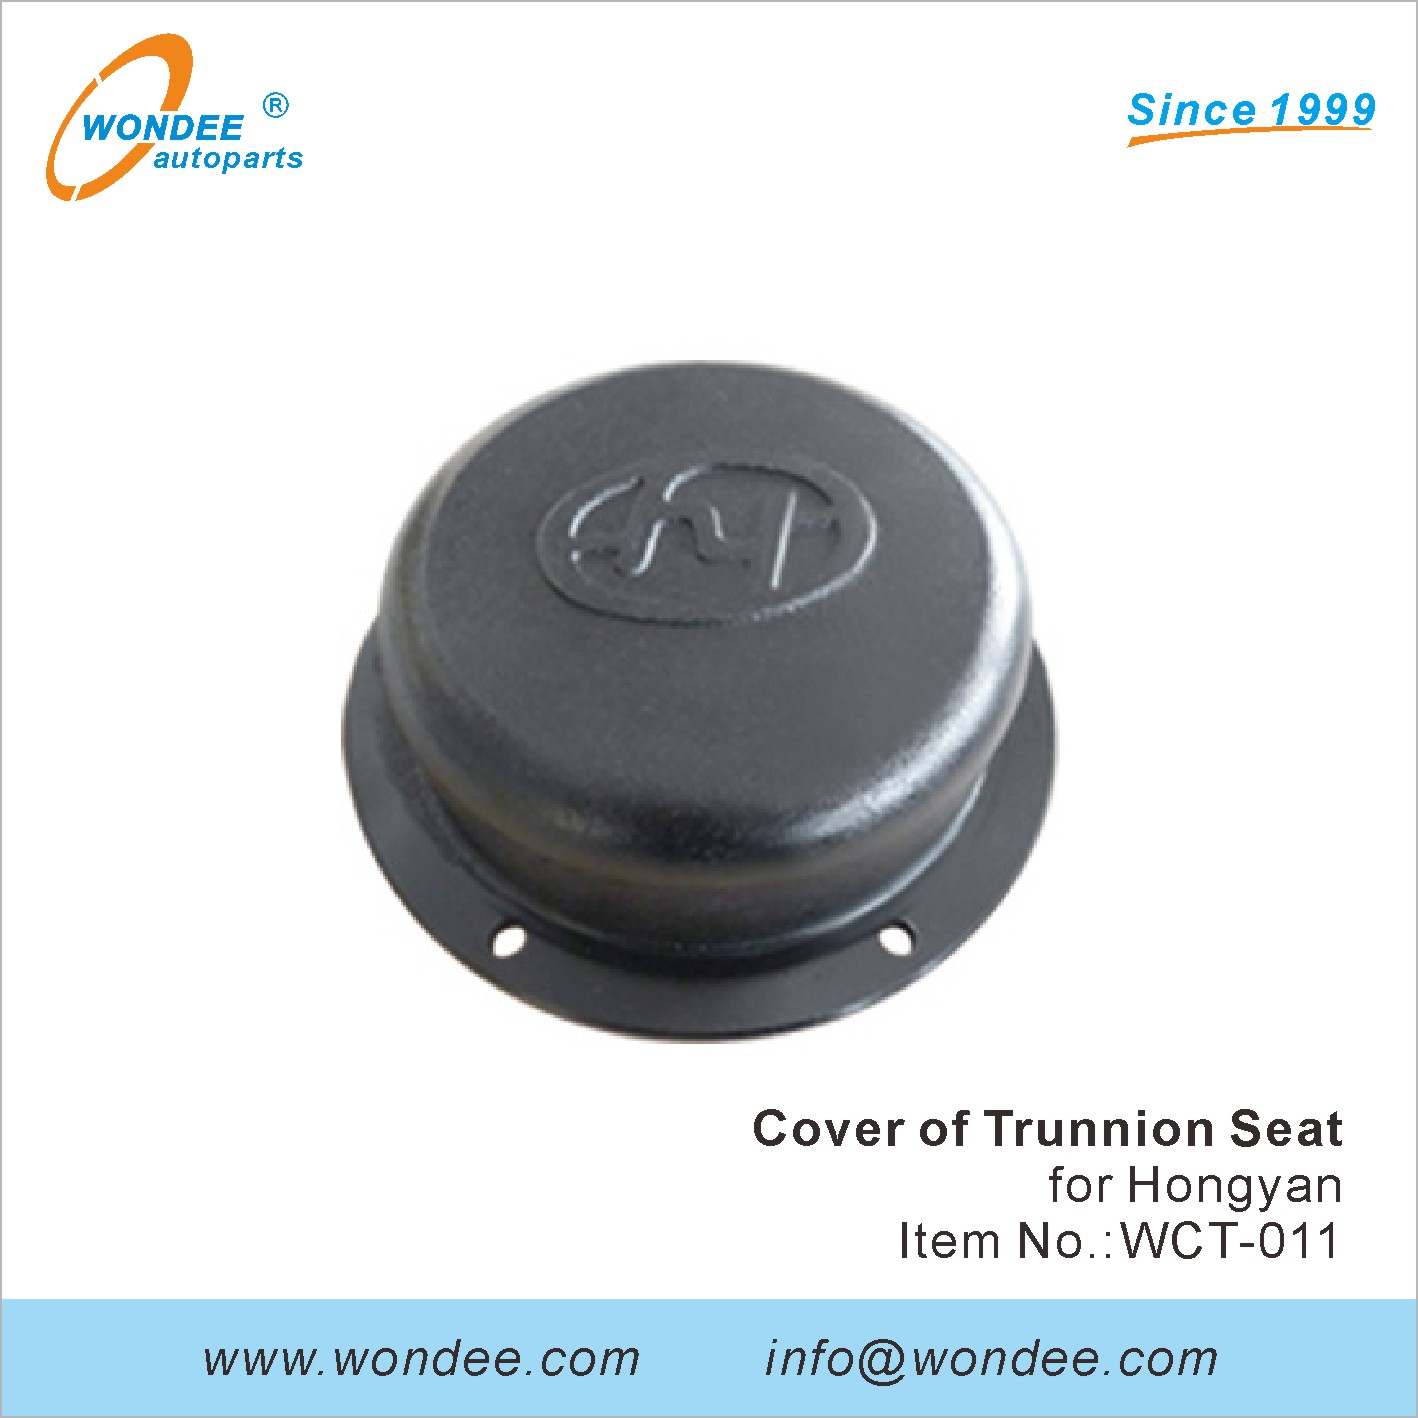 WONDEE cover of trunnion seat (11)